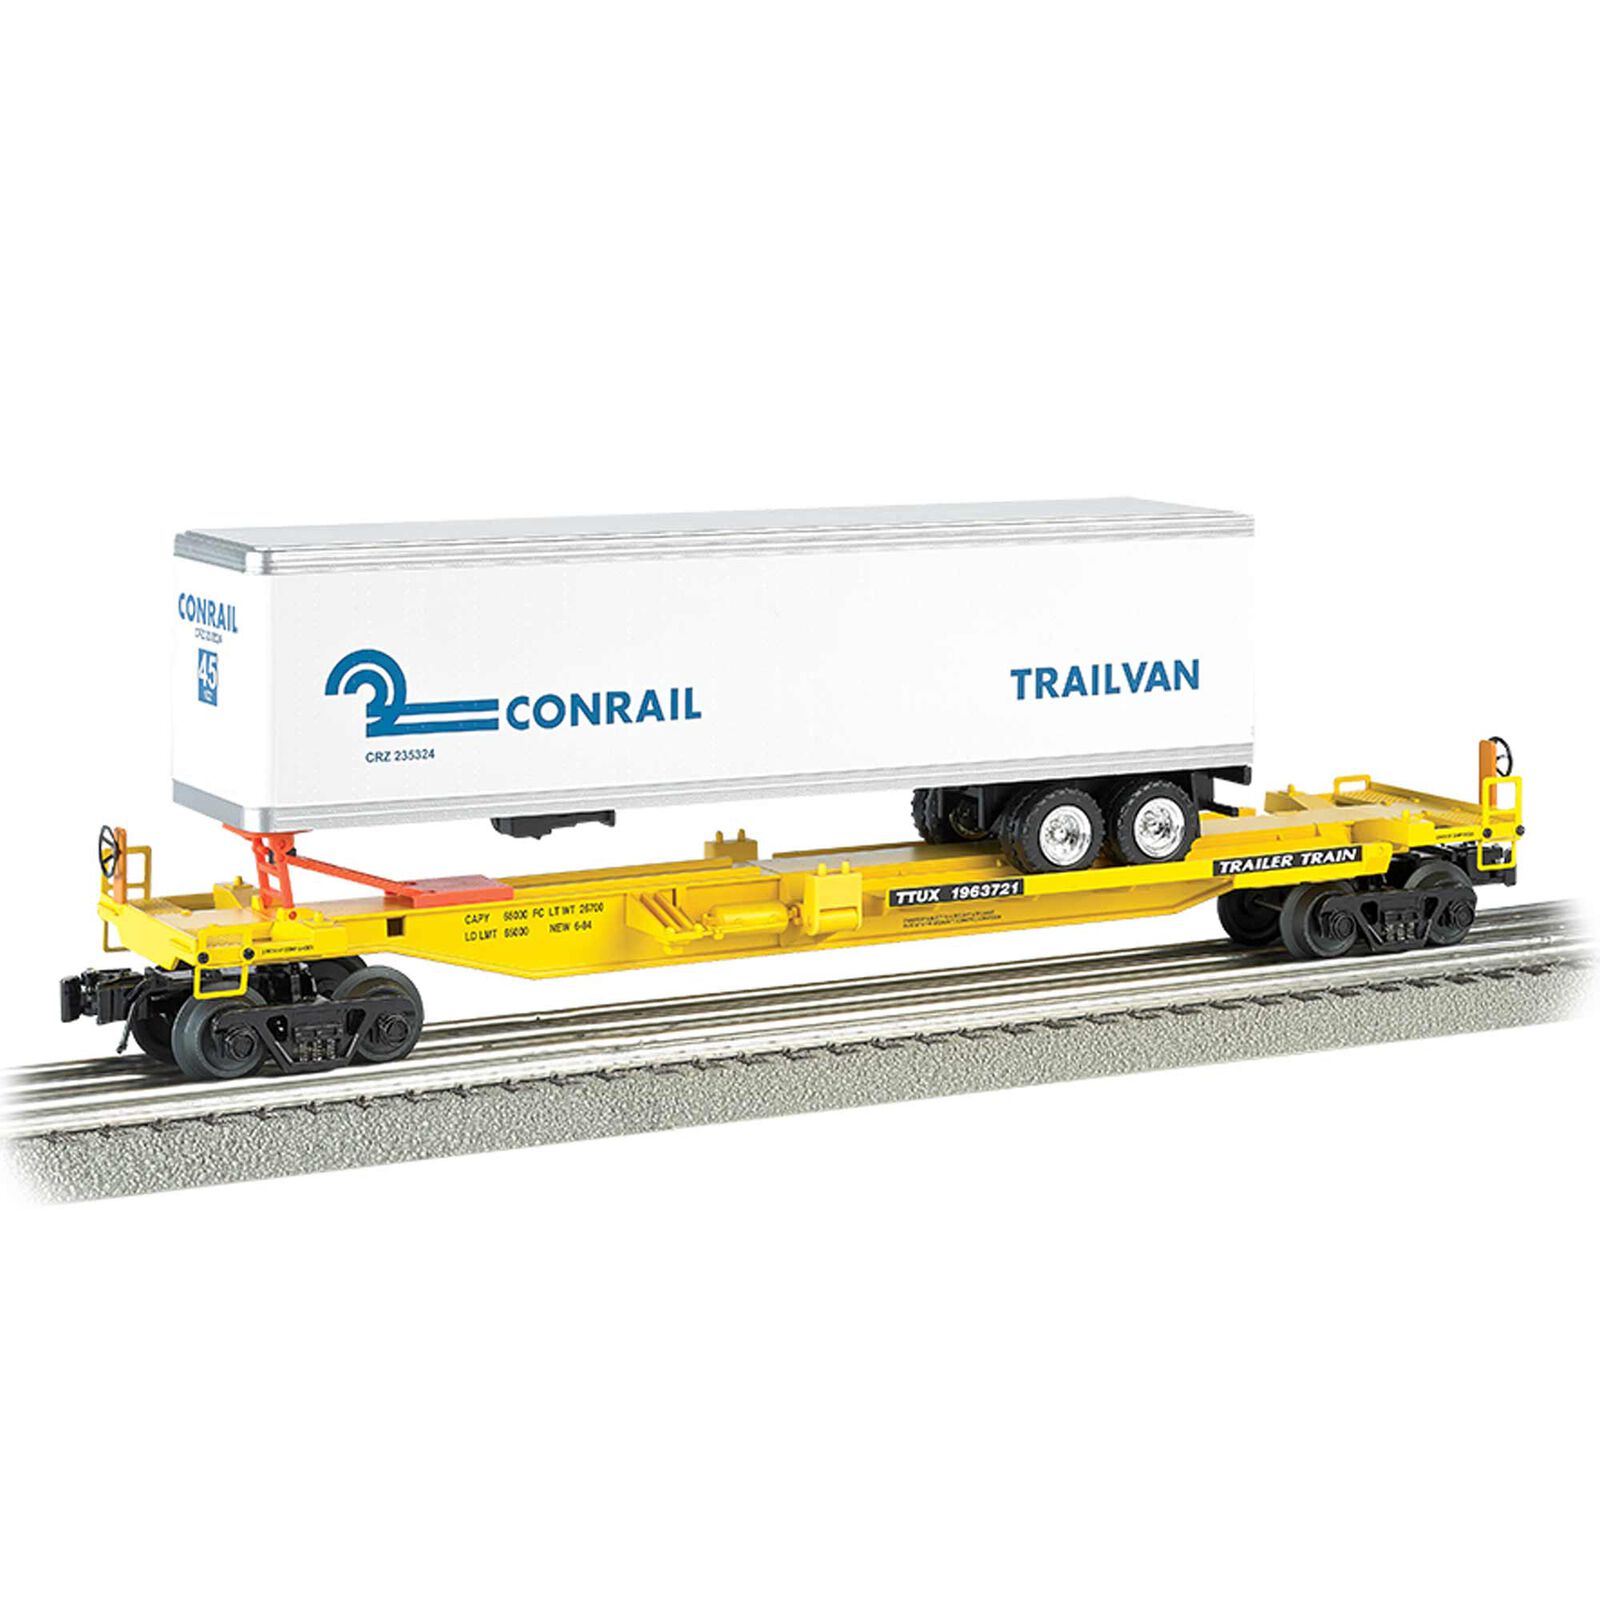 O Williams Front Runner with Trailer, Conrail